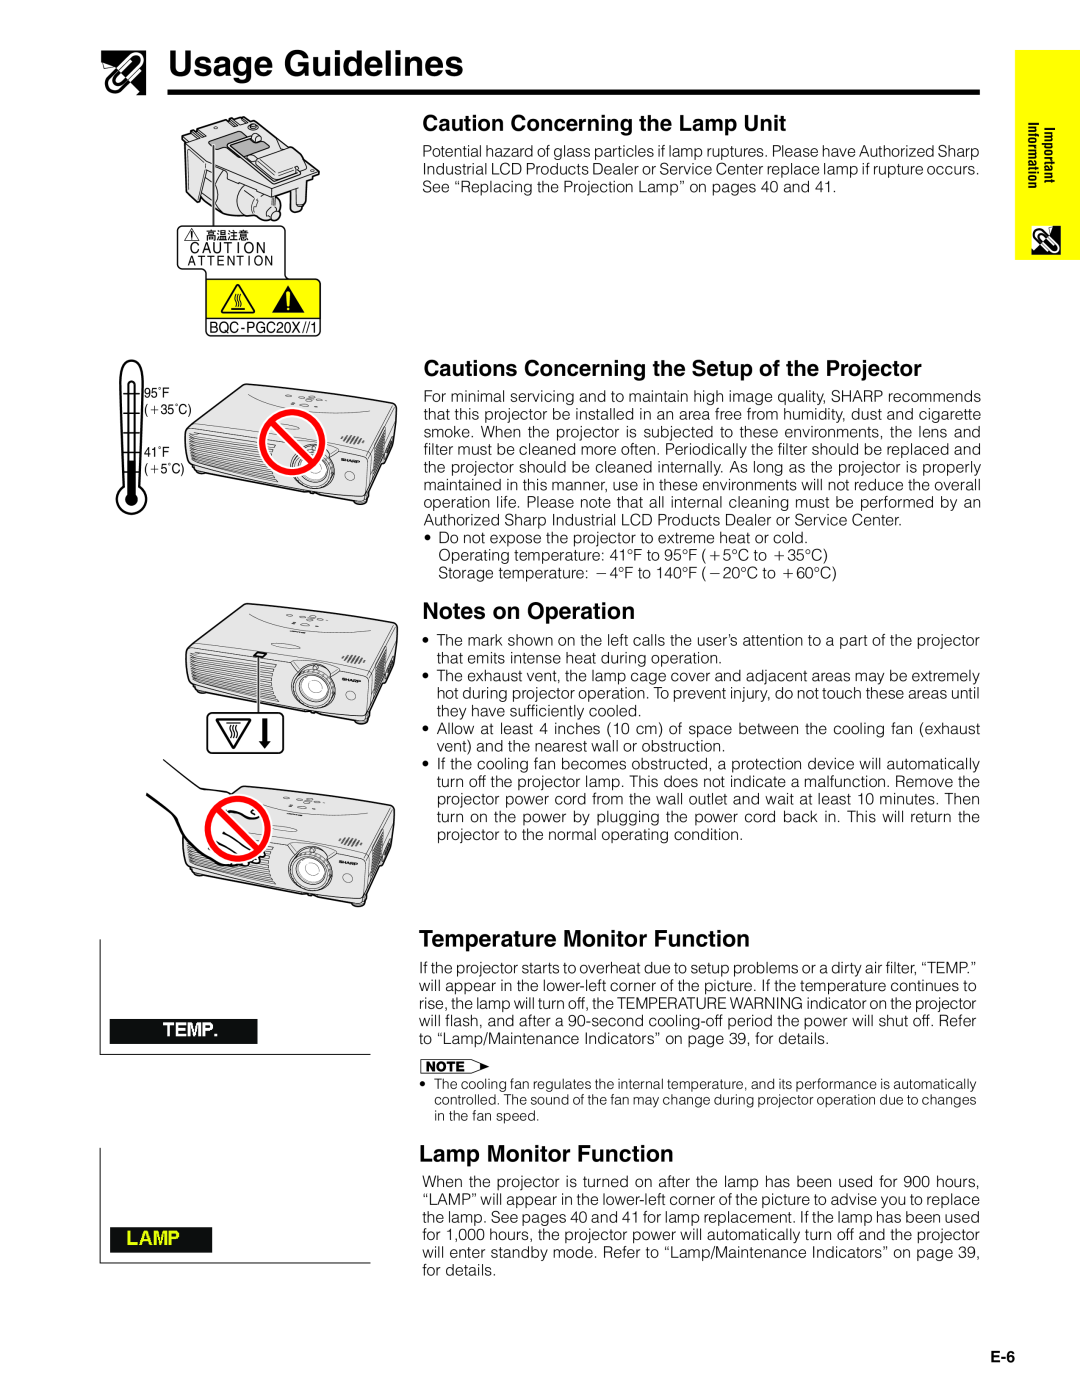 Sharp PG-C20XU Usage Guidelines, Caution Concerning the Lamp Unit, Cautions Concerning the Setup of the Projector 